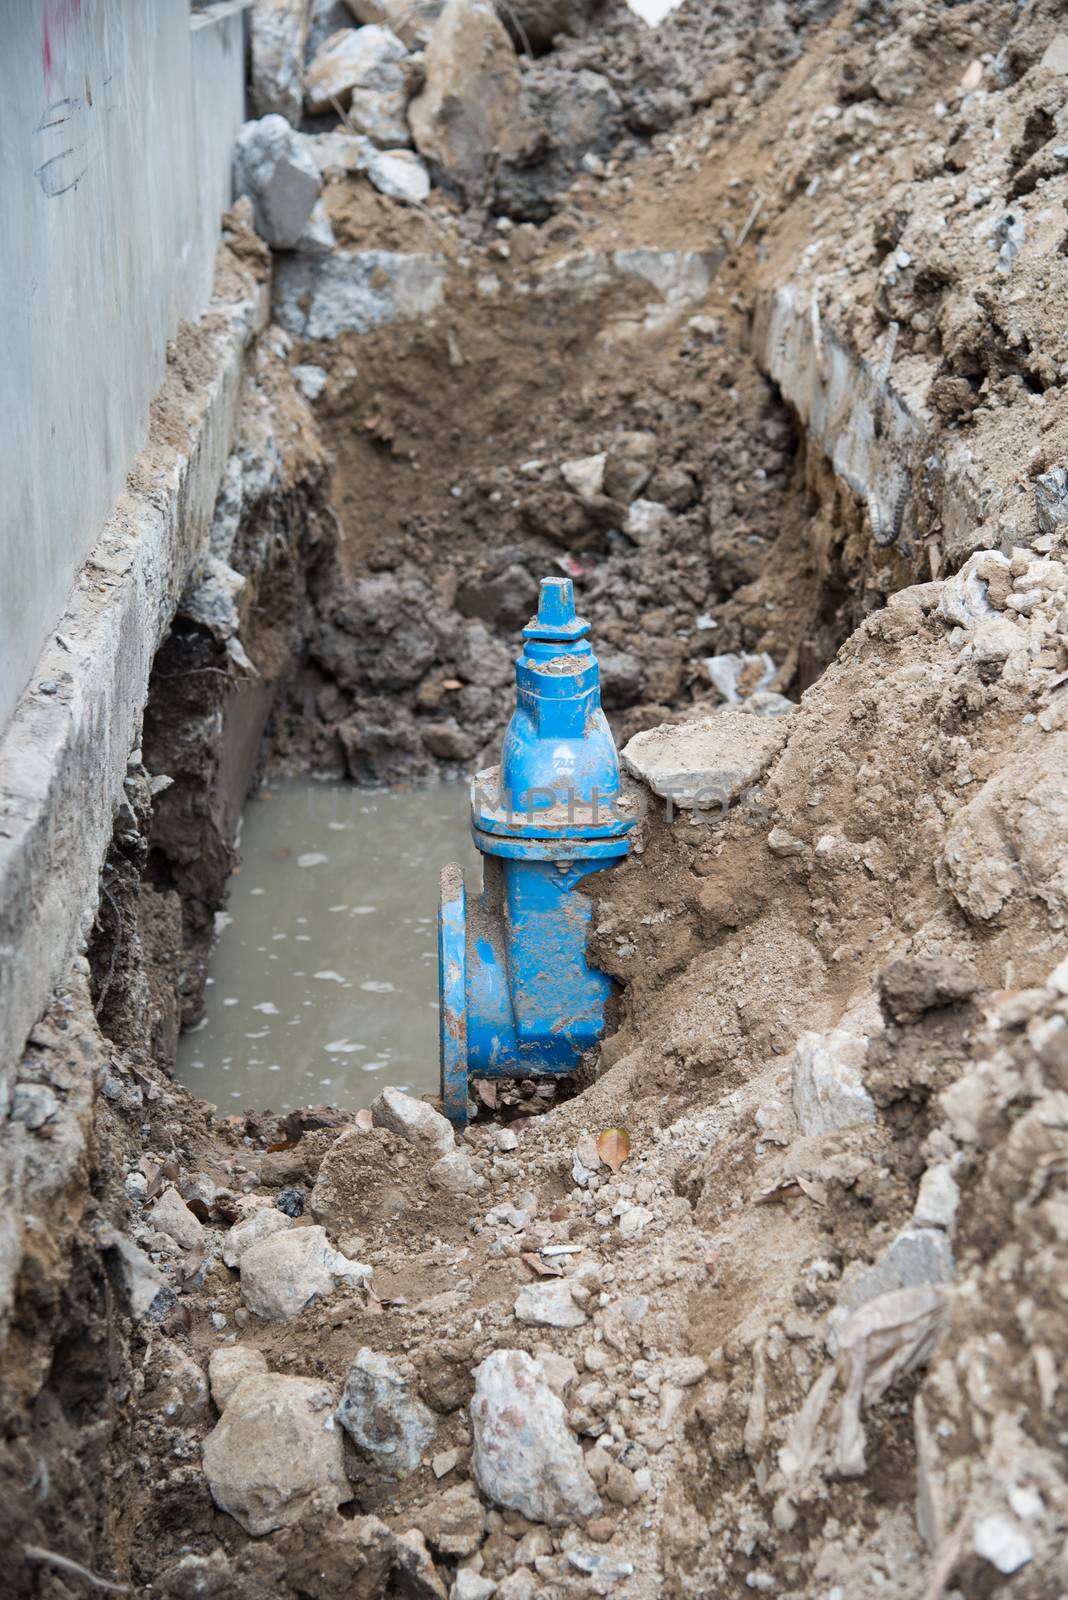 Water PVC Plastic Pipes in Ground during Plumbing Construction s by Soranop01